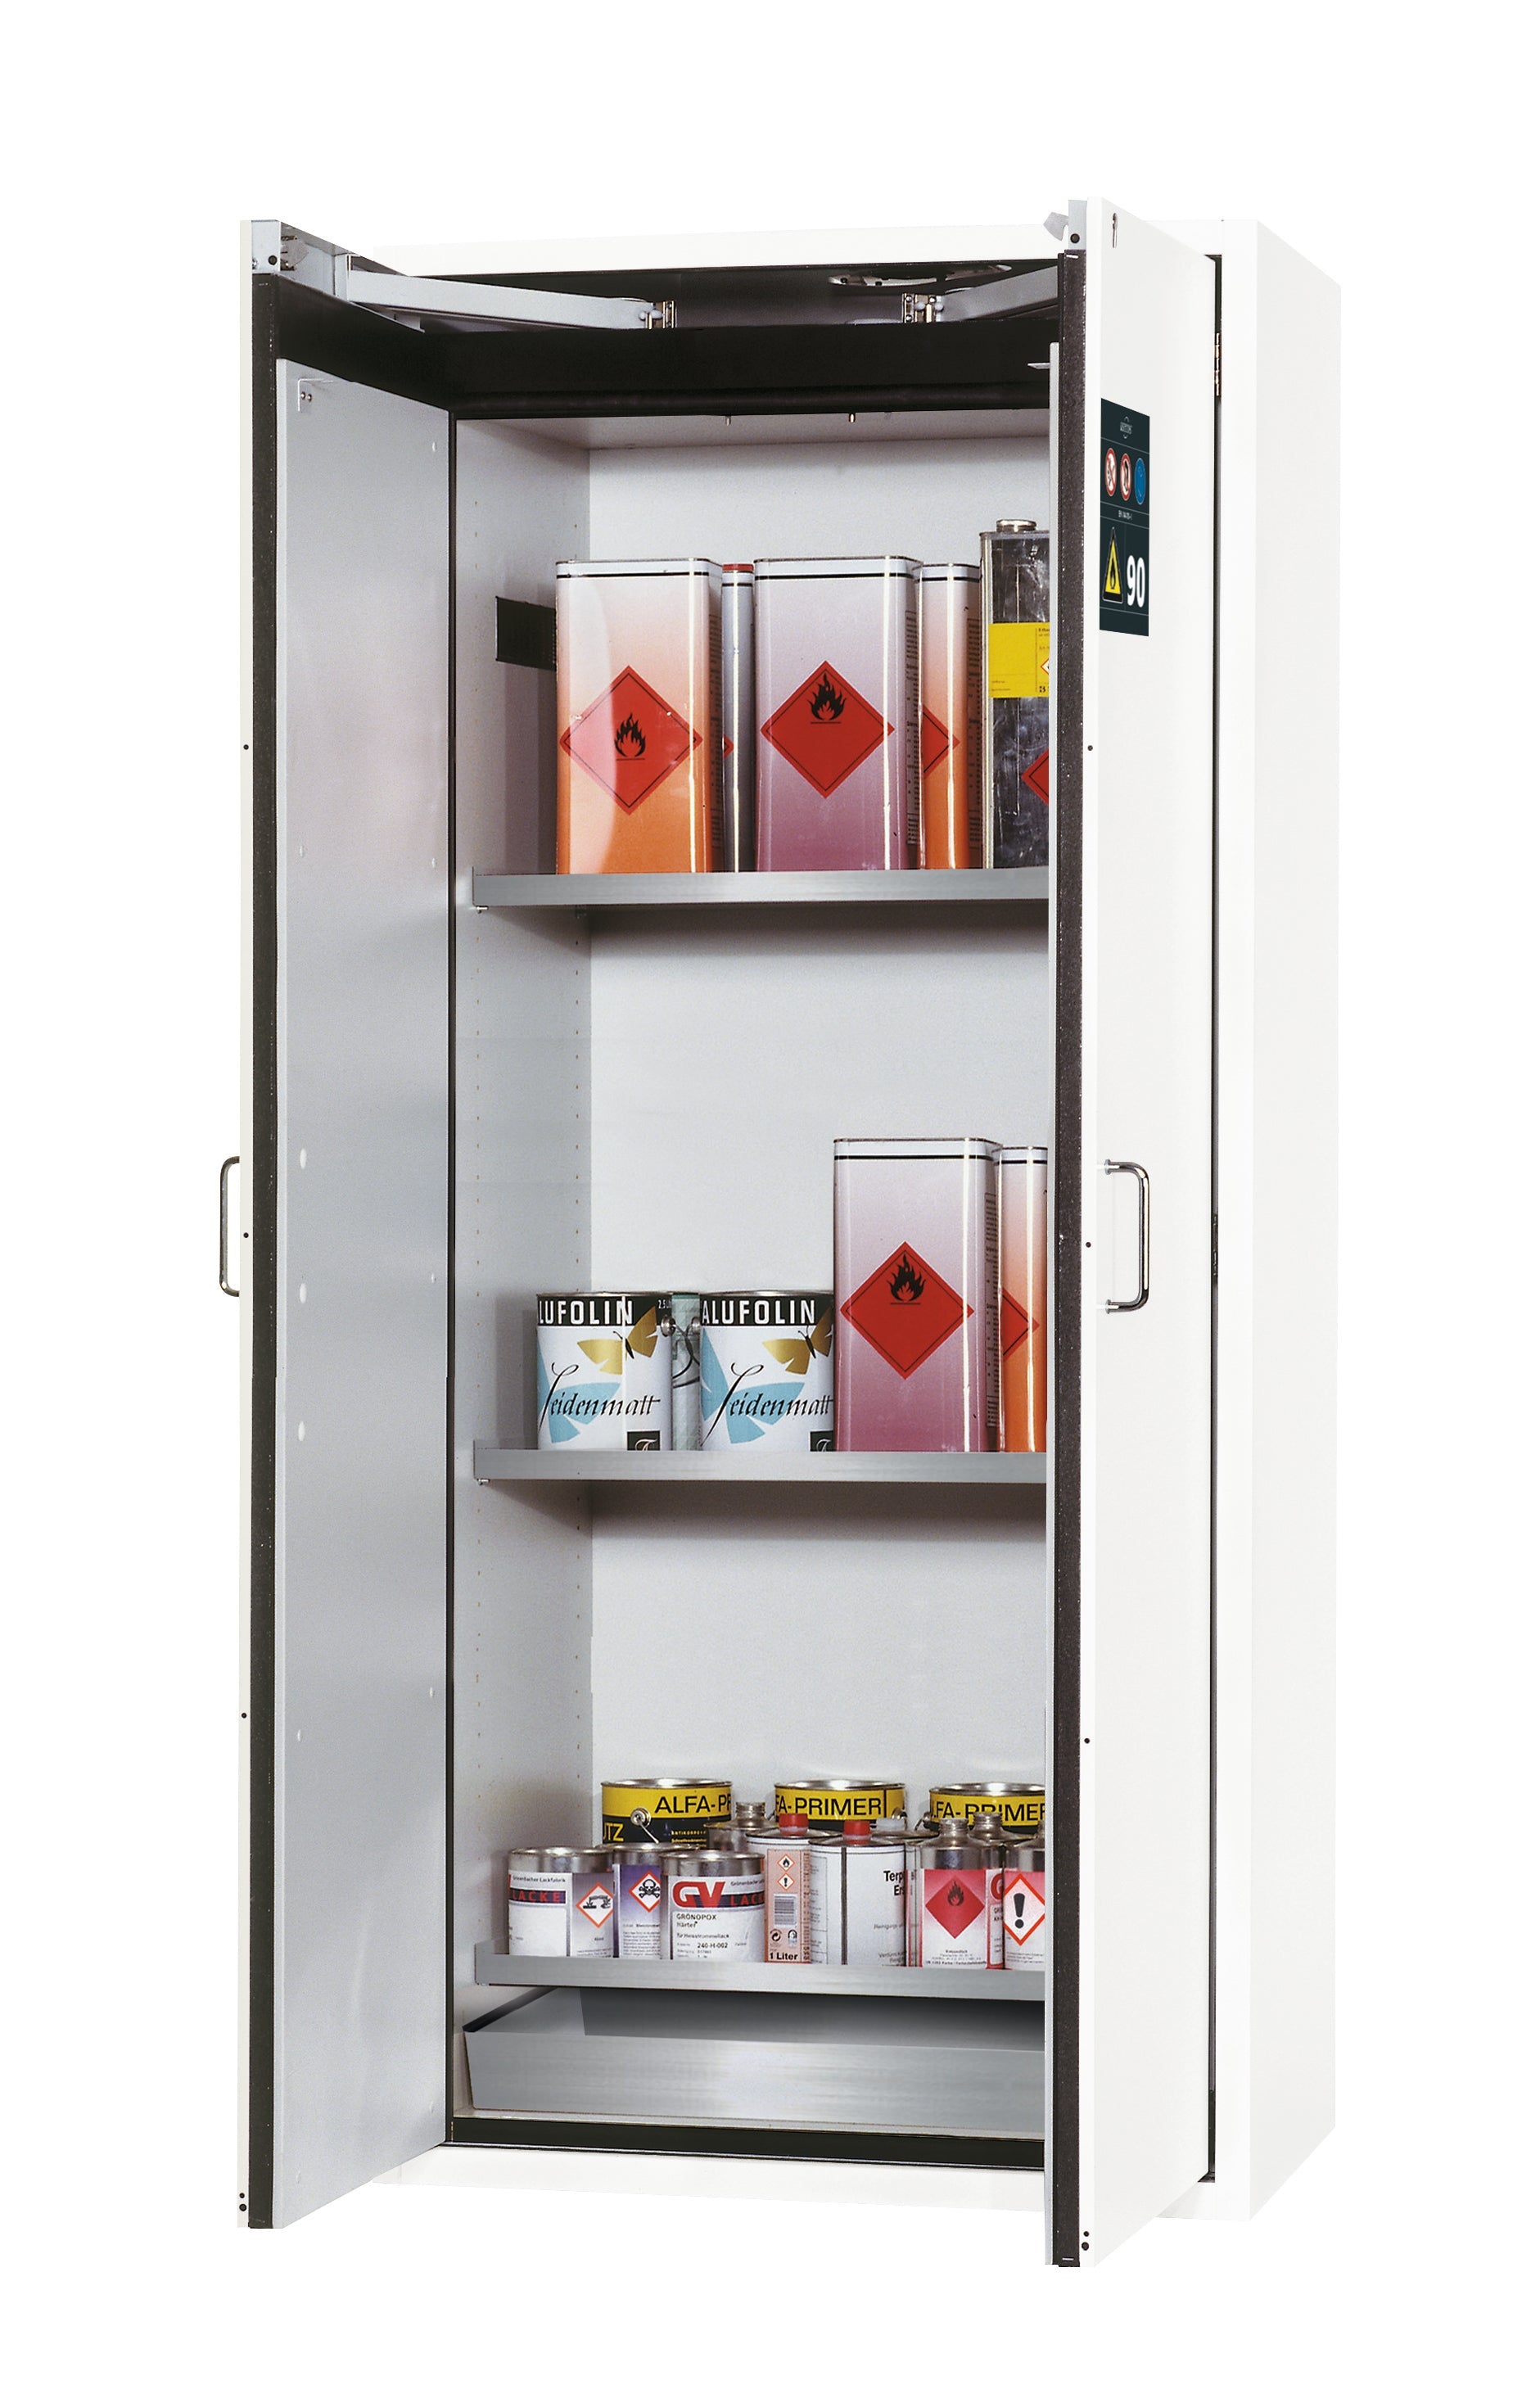 Type 90 safety cabinet S-CLASSIC-90 model S90.196.090.WDAS in laboratory white (similar to RAL 9016) with 3x standard shelves (stainless steel 1.4301)